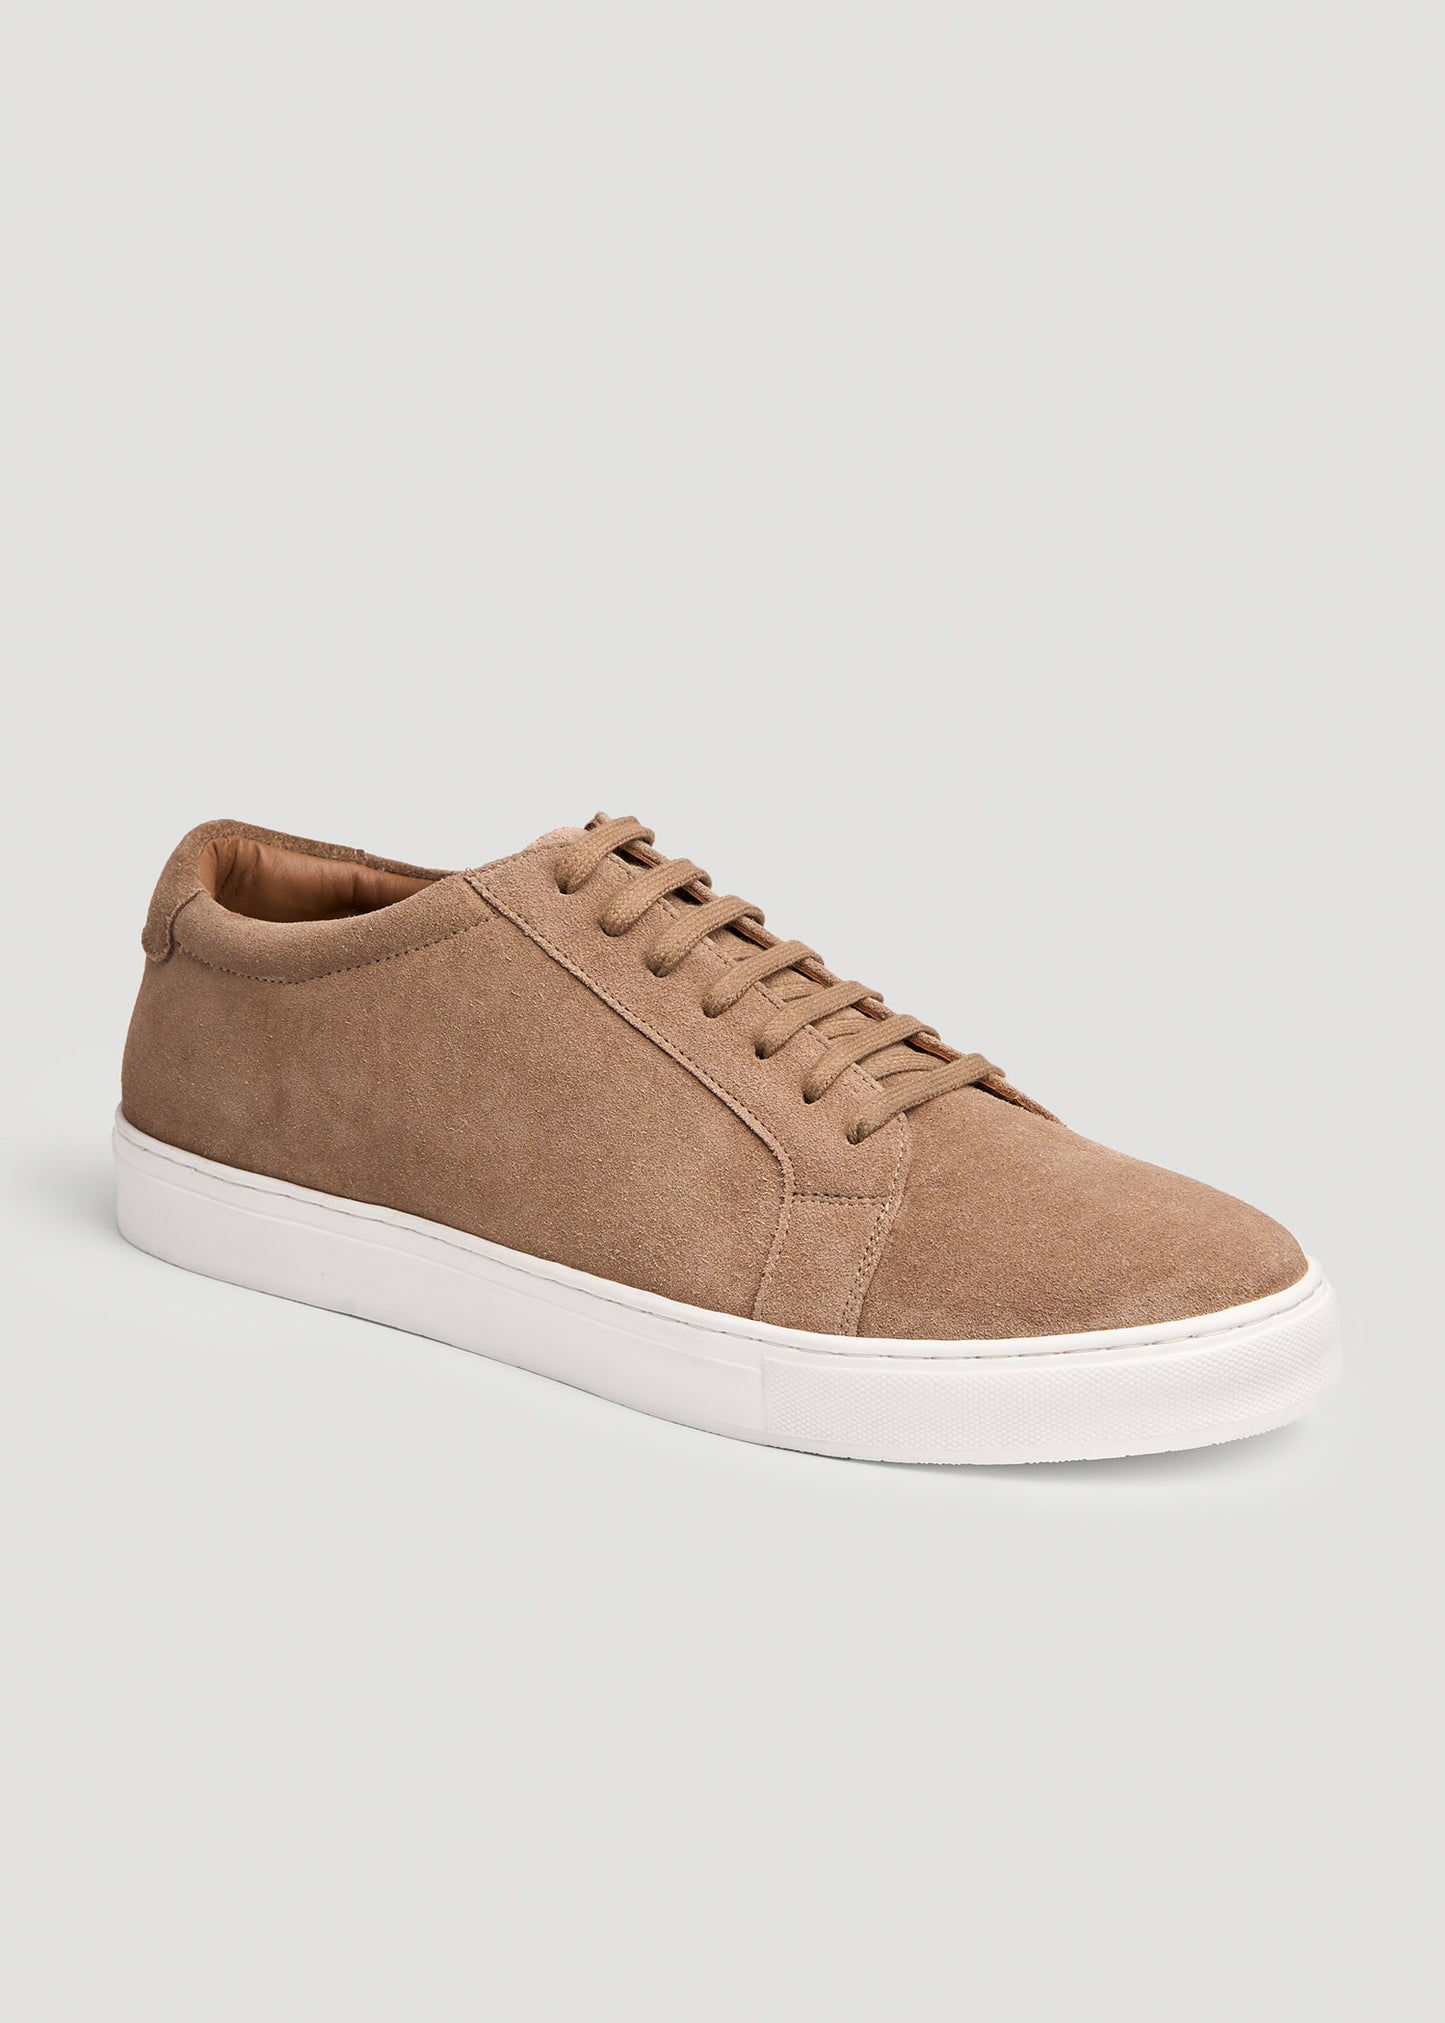 Tall Men’s Cupsole Tennis Sneakers in Taupe Suede